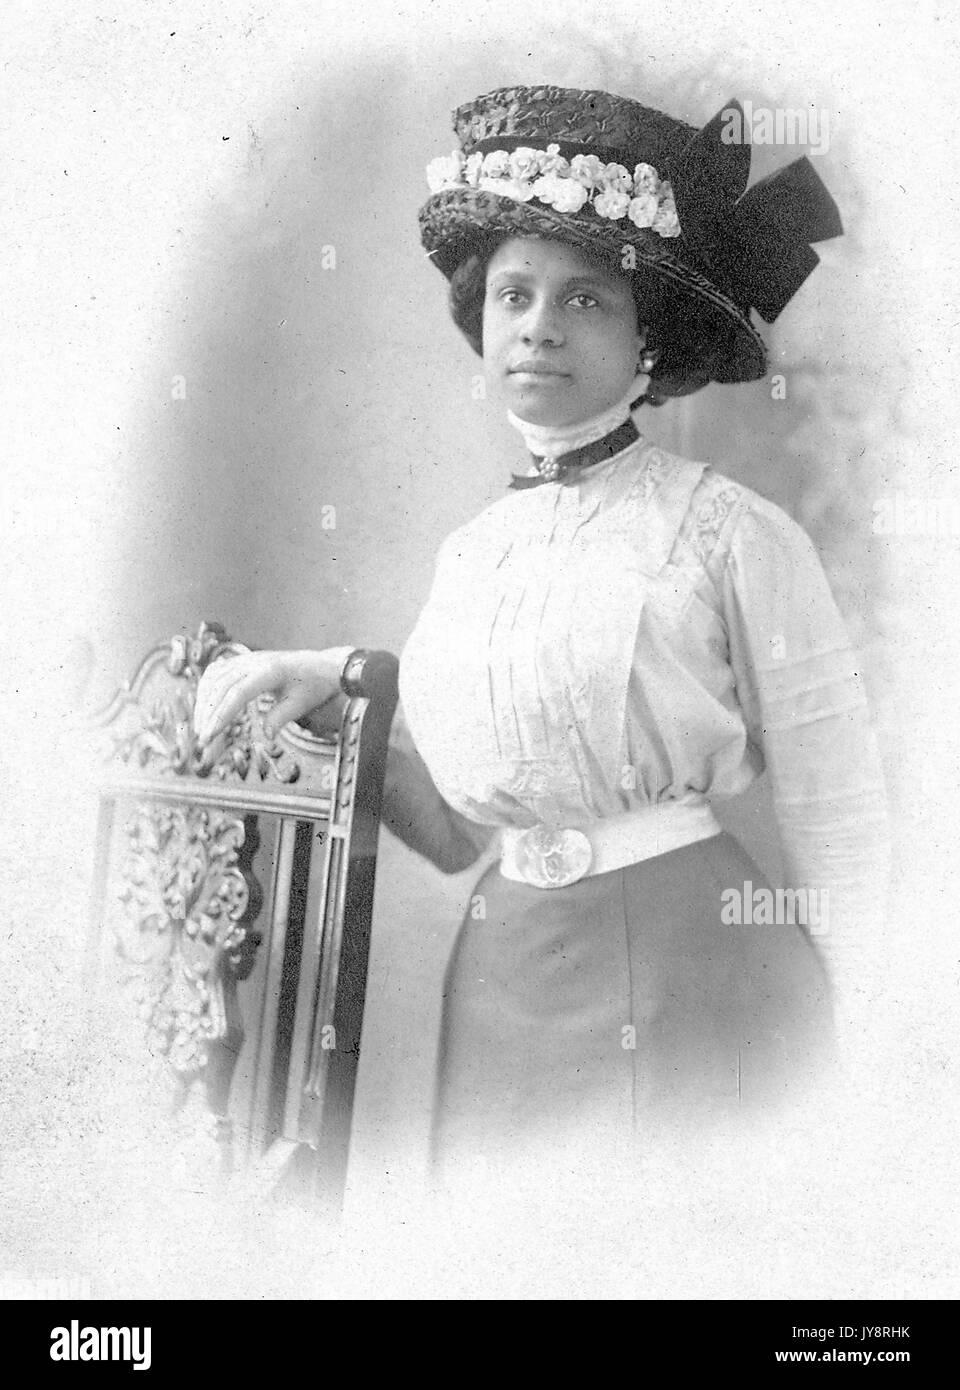 Half length standing portrait of young African American woman next to chair, wearing a blouse, a skirt, an elaborate hat, earrings, and a neutral expression, possibly Philadelphia, Pennsylvania, 1915. Stock Photo